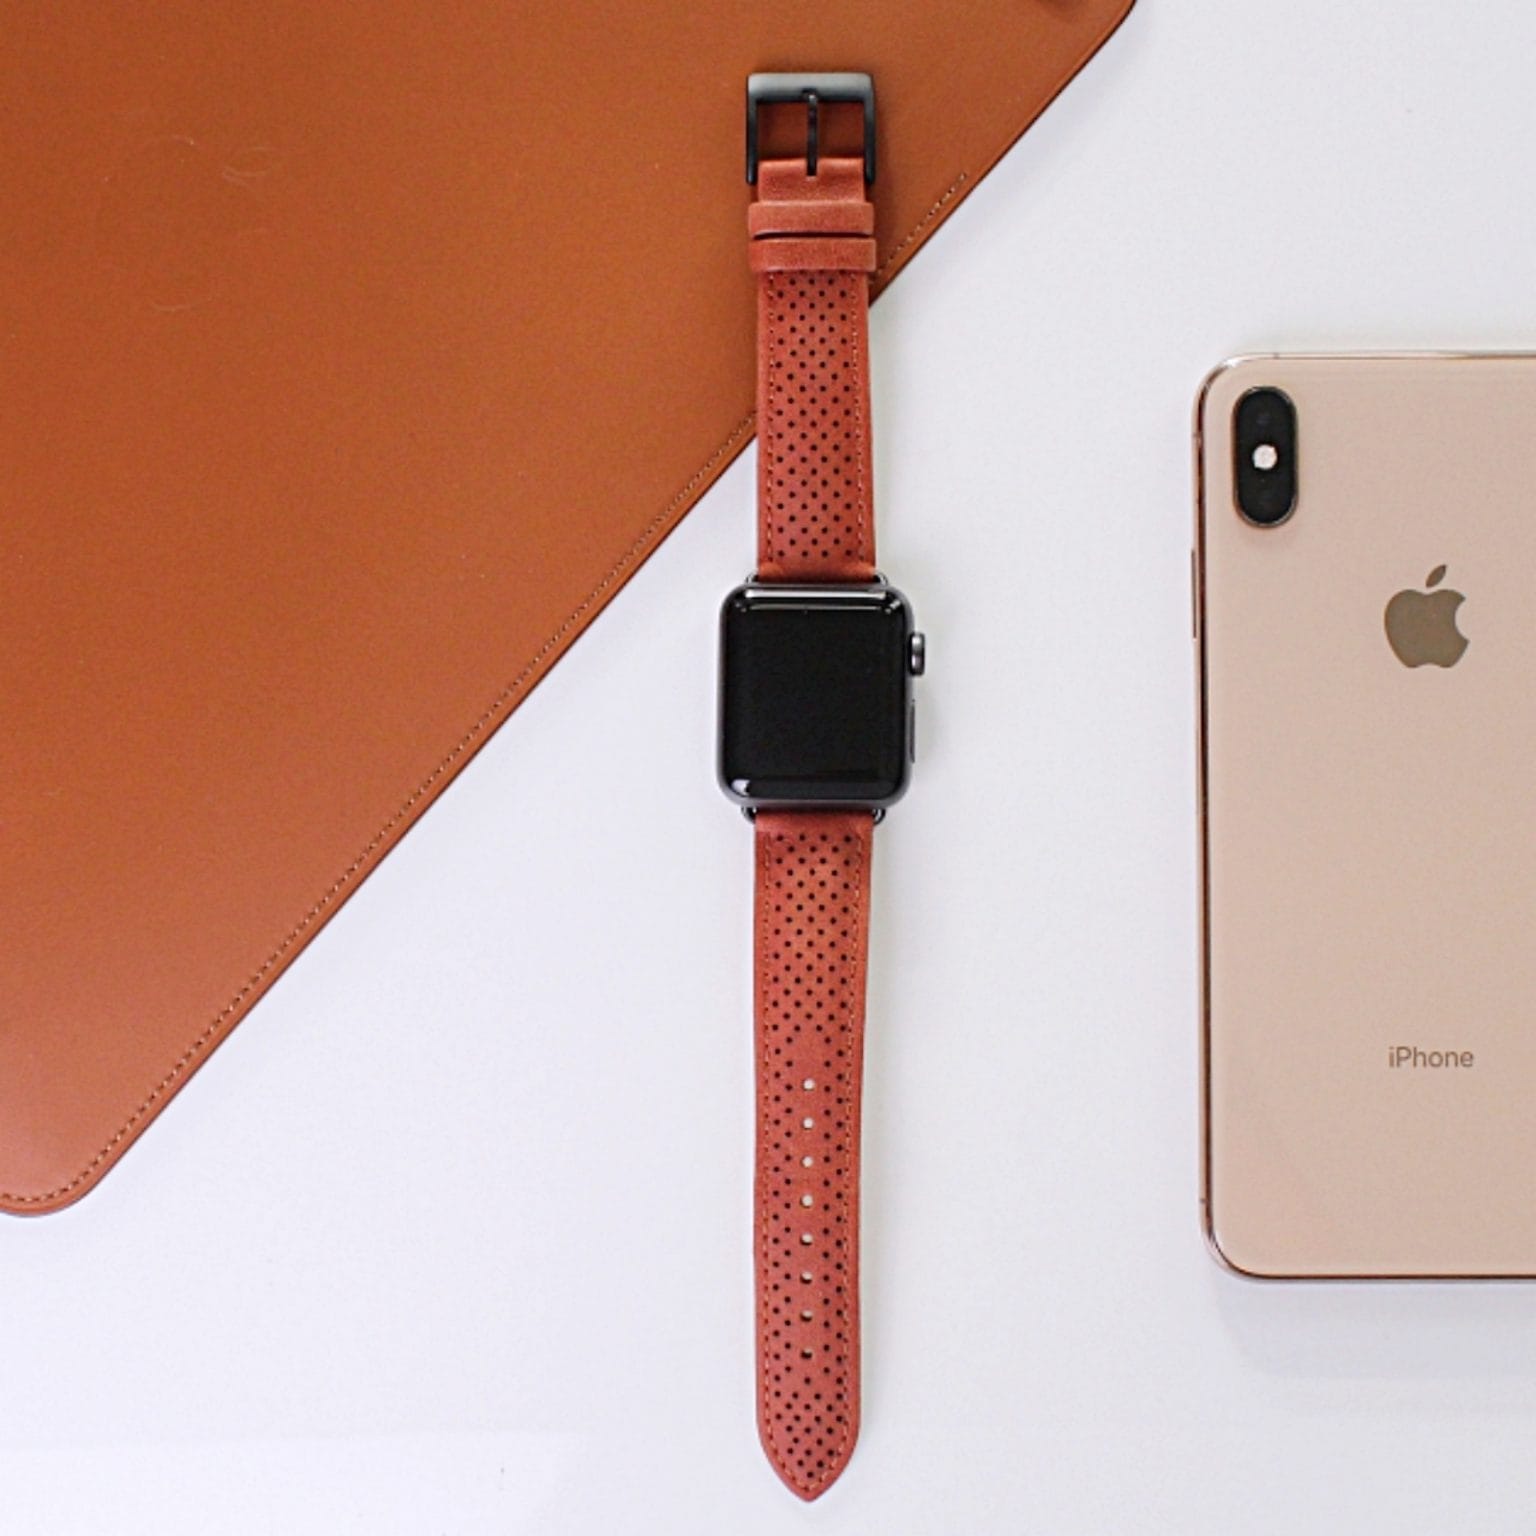 Win a classy perforated leather Apple Watch band from Monowear [Cult of Mac giveaway]